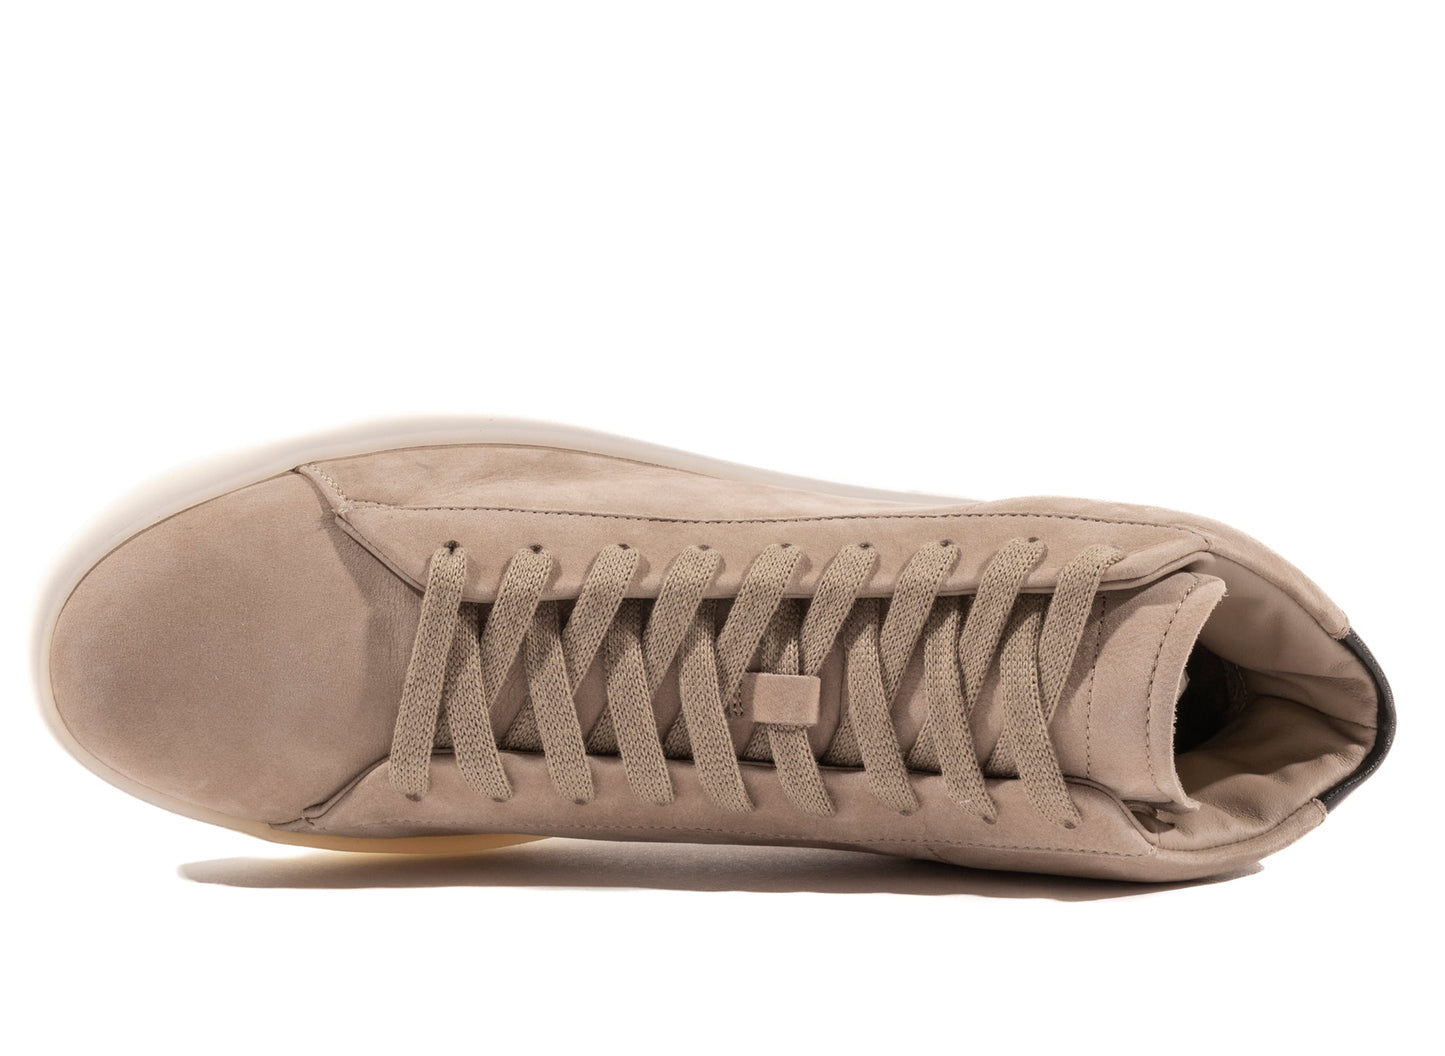 Fear of God Tennis Mid 'Warm Taupe'